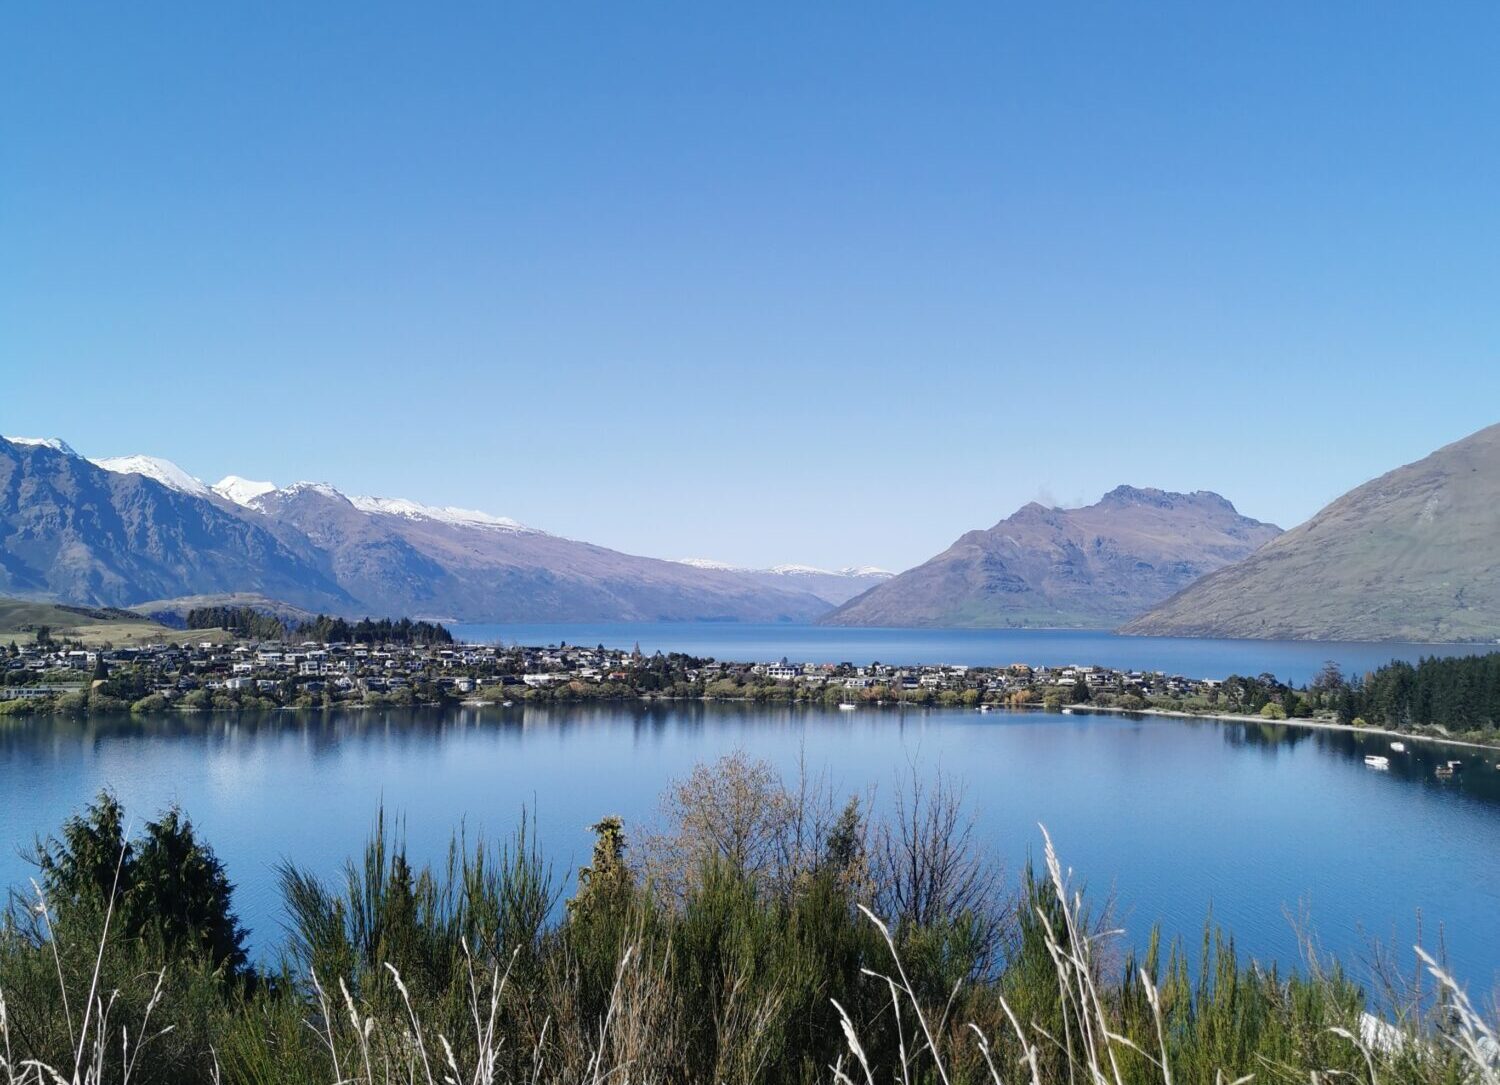 The Local’s Guide to Queenstown: Where to stay, eat and explore